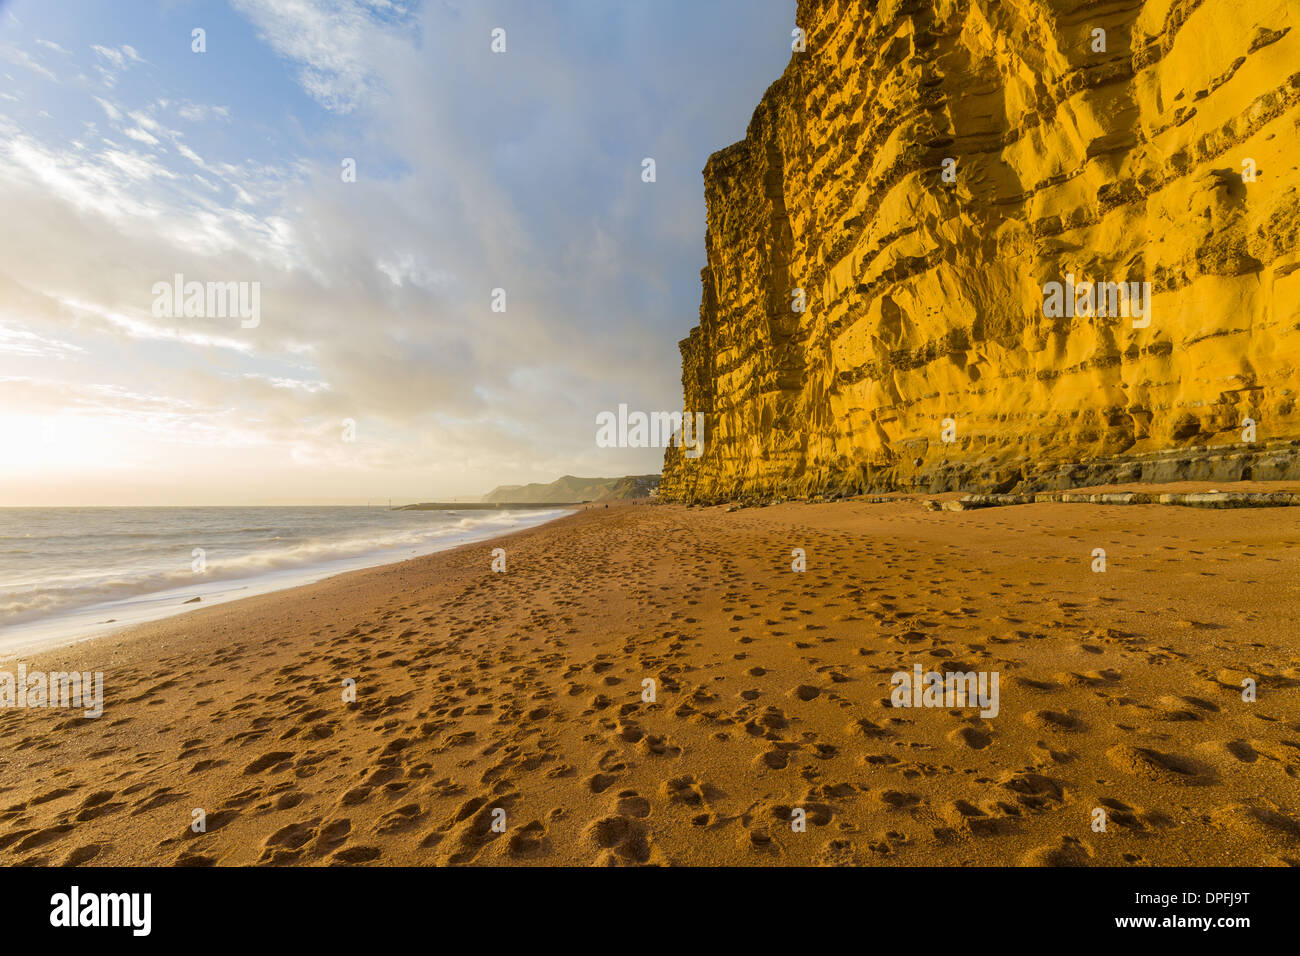 The late afternoon winter sun lights up the red sandstone cliffs at West Bay, Dorset, on the Jurassic Coast. November 2013. Stock Photo